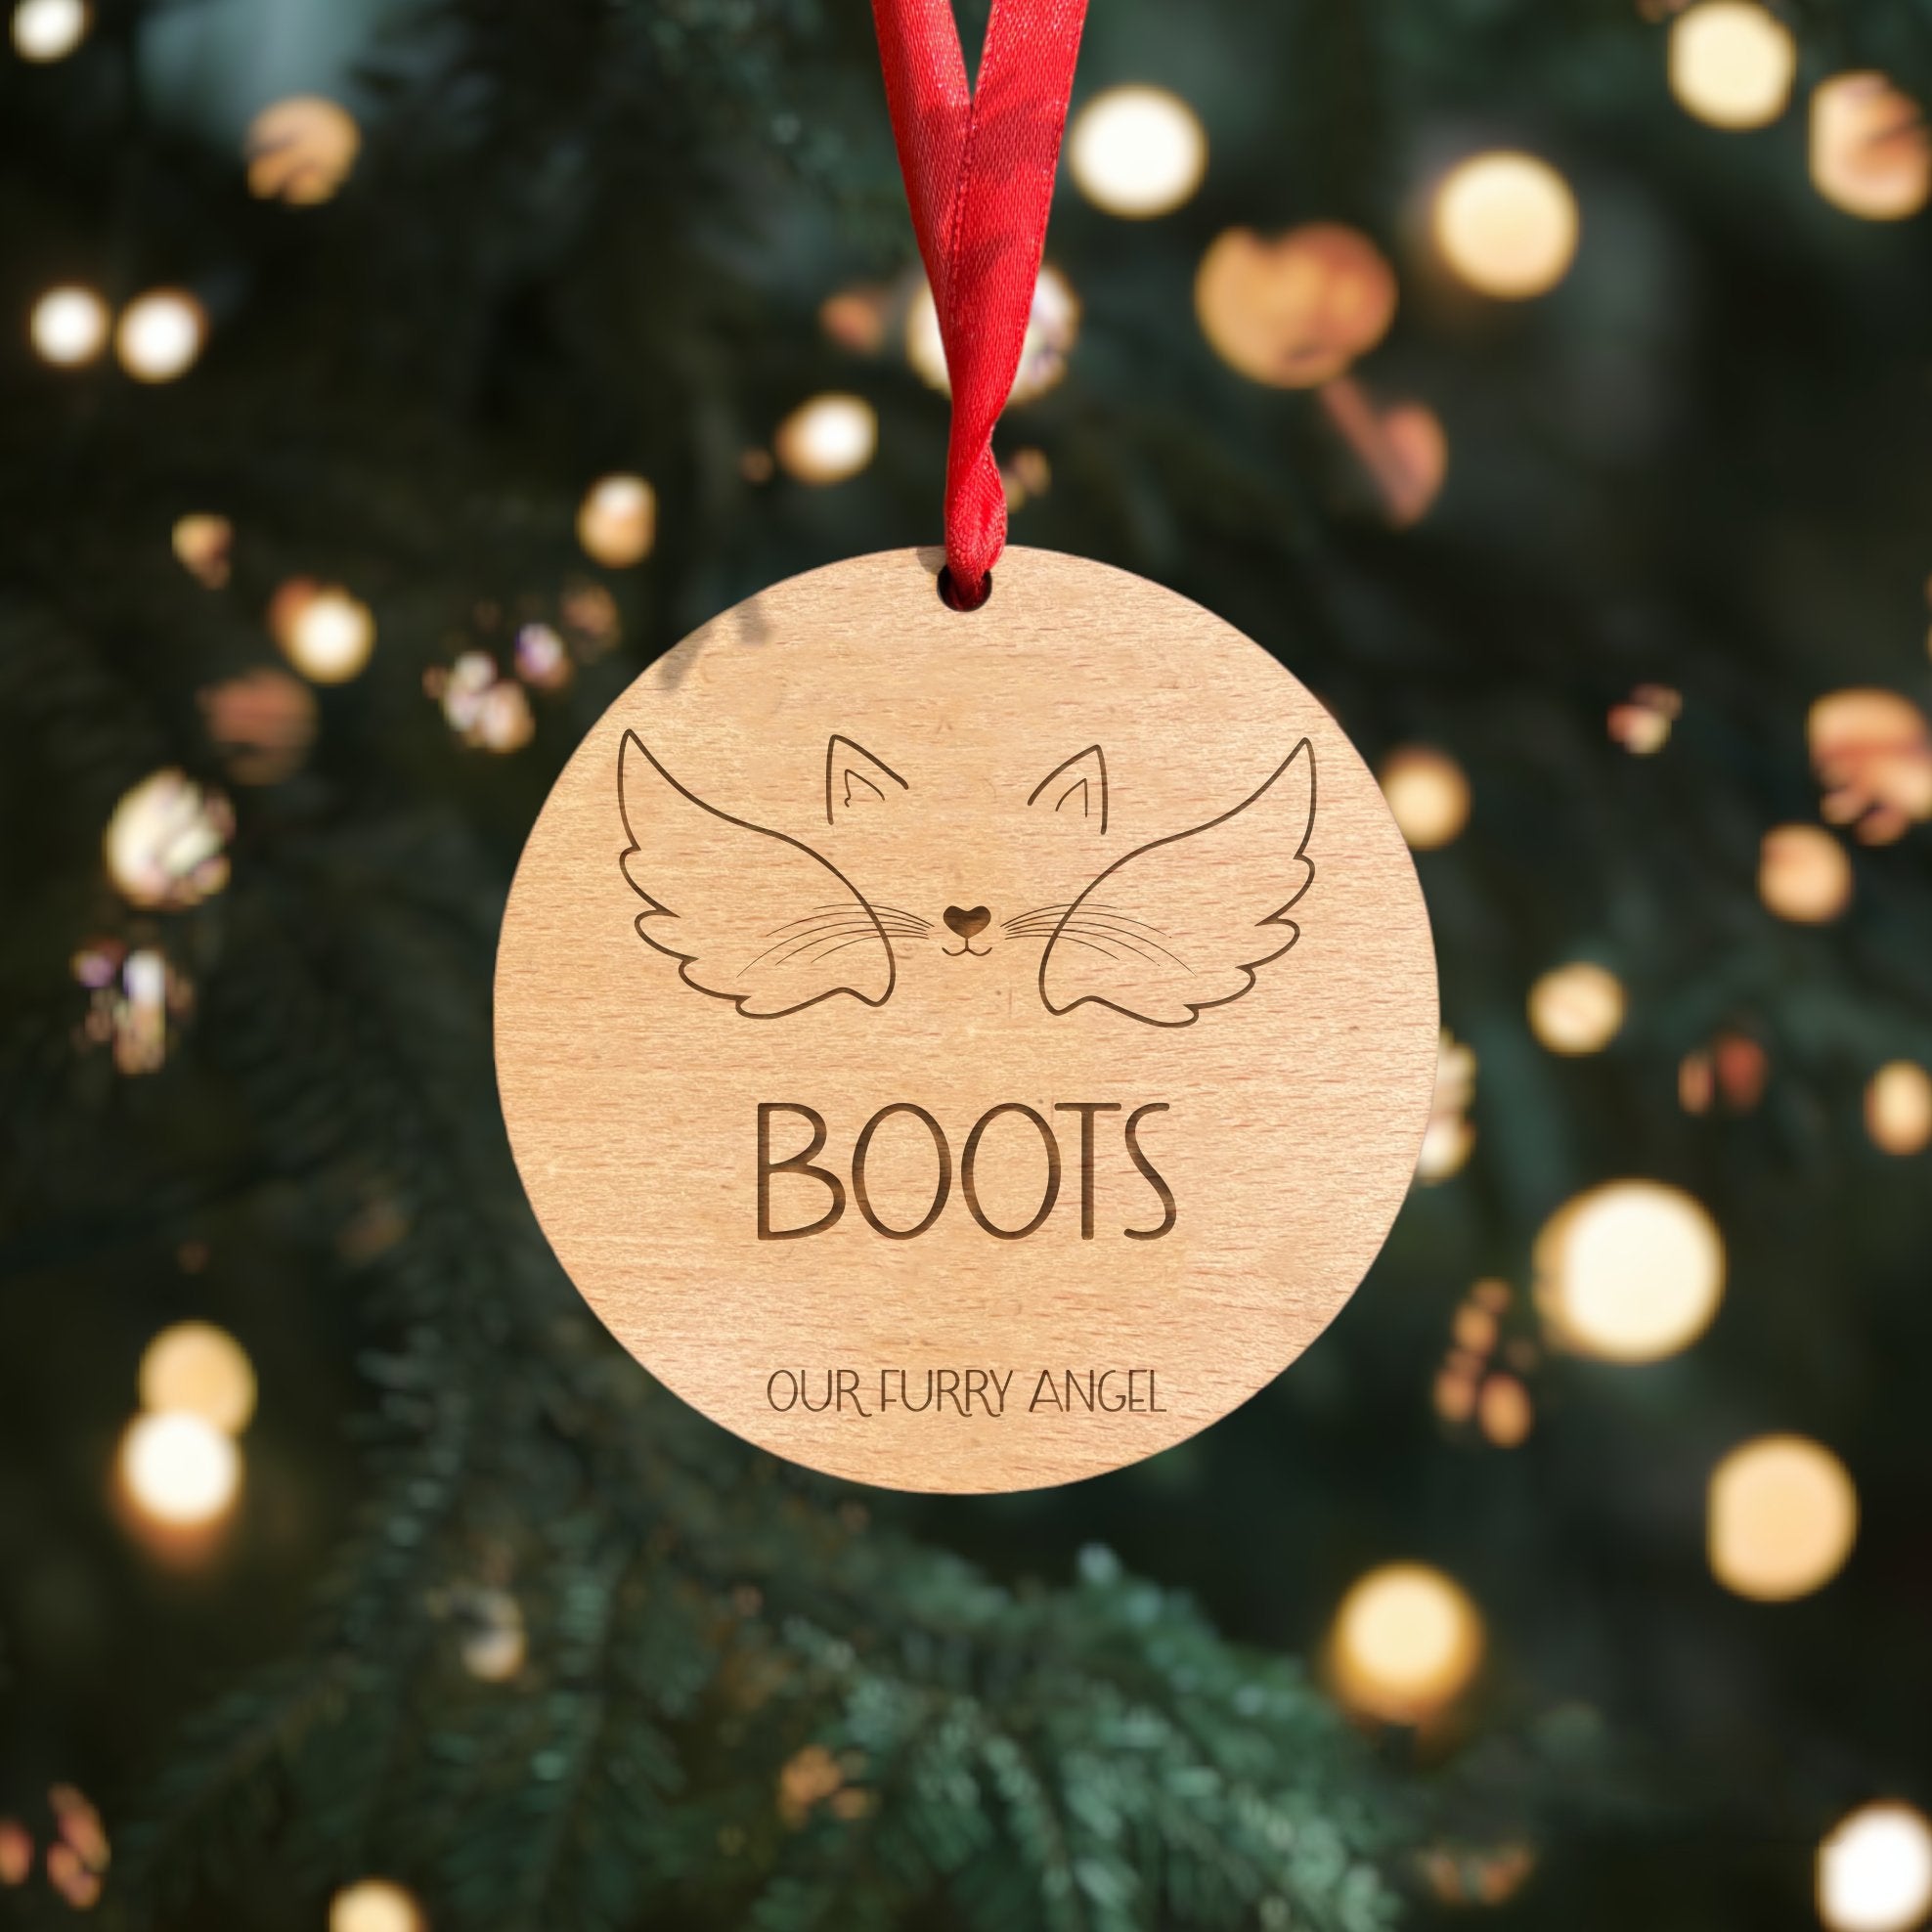 Personalised wooden memorial cat bauble with name, ears, nose, mouth, and whiskers details. Crafted from 4mm beech veneer wood with a classic red ribbon. A special tribute to your furry angel for the holidays. Writing at the bottom reads 'Our furry angel.